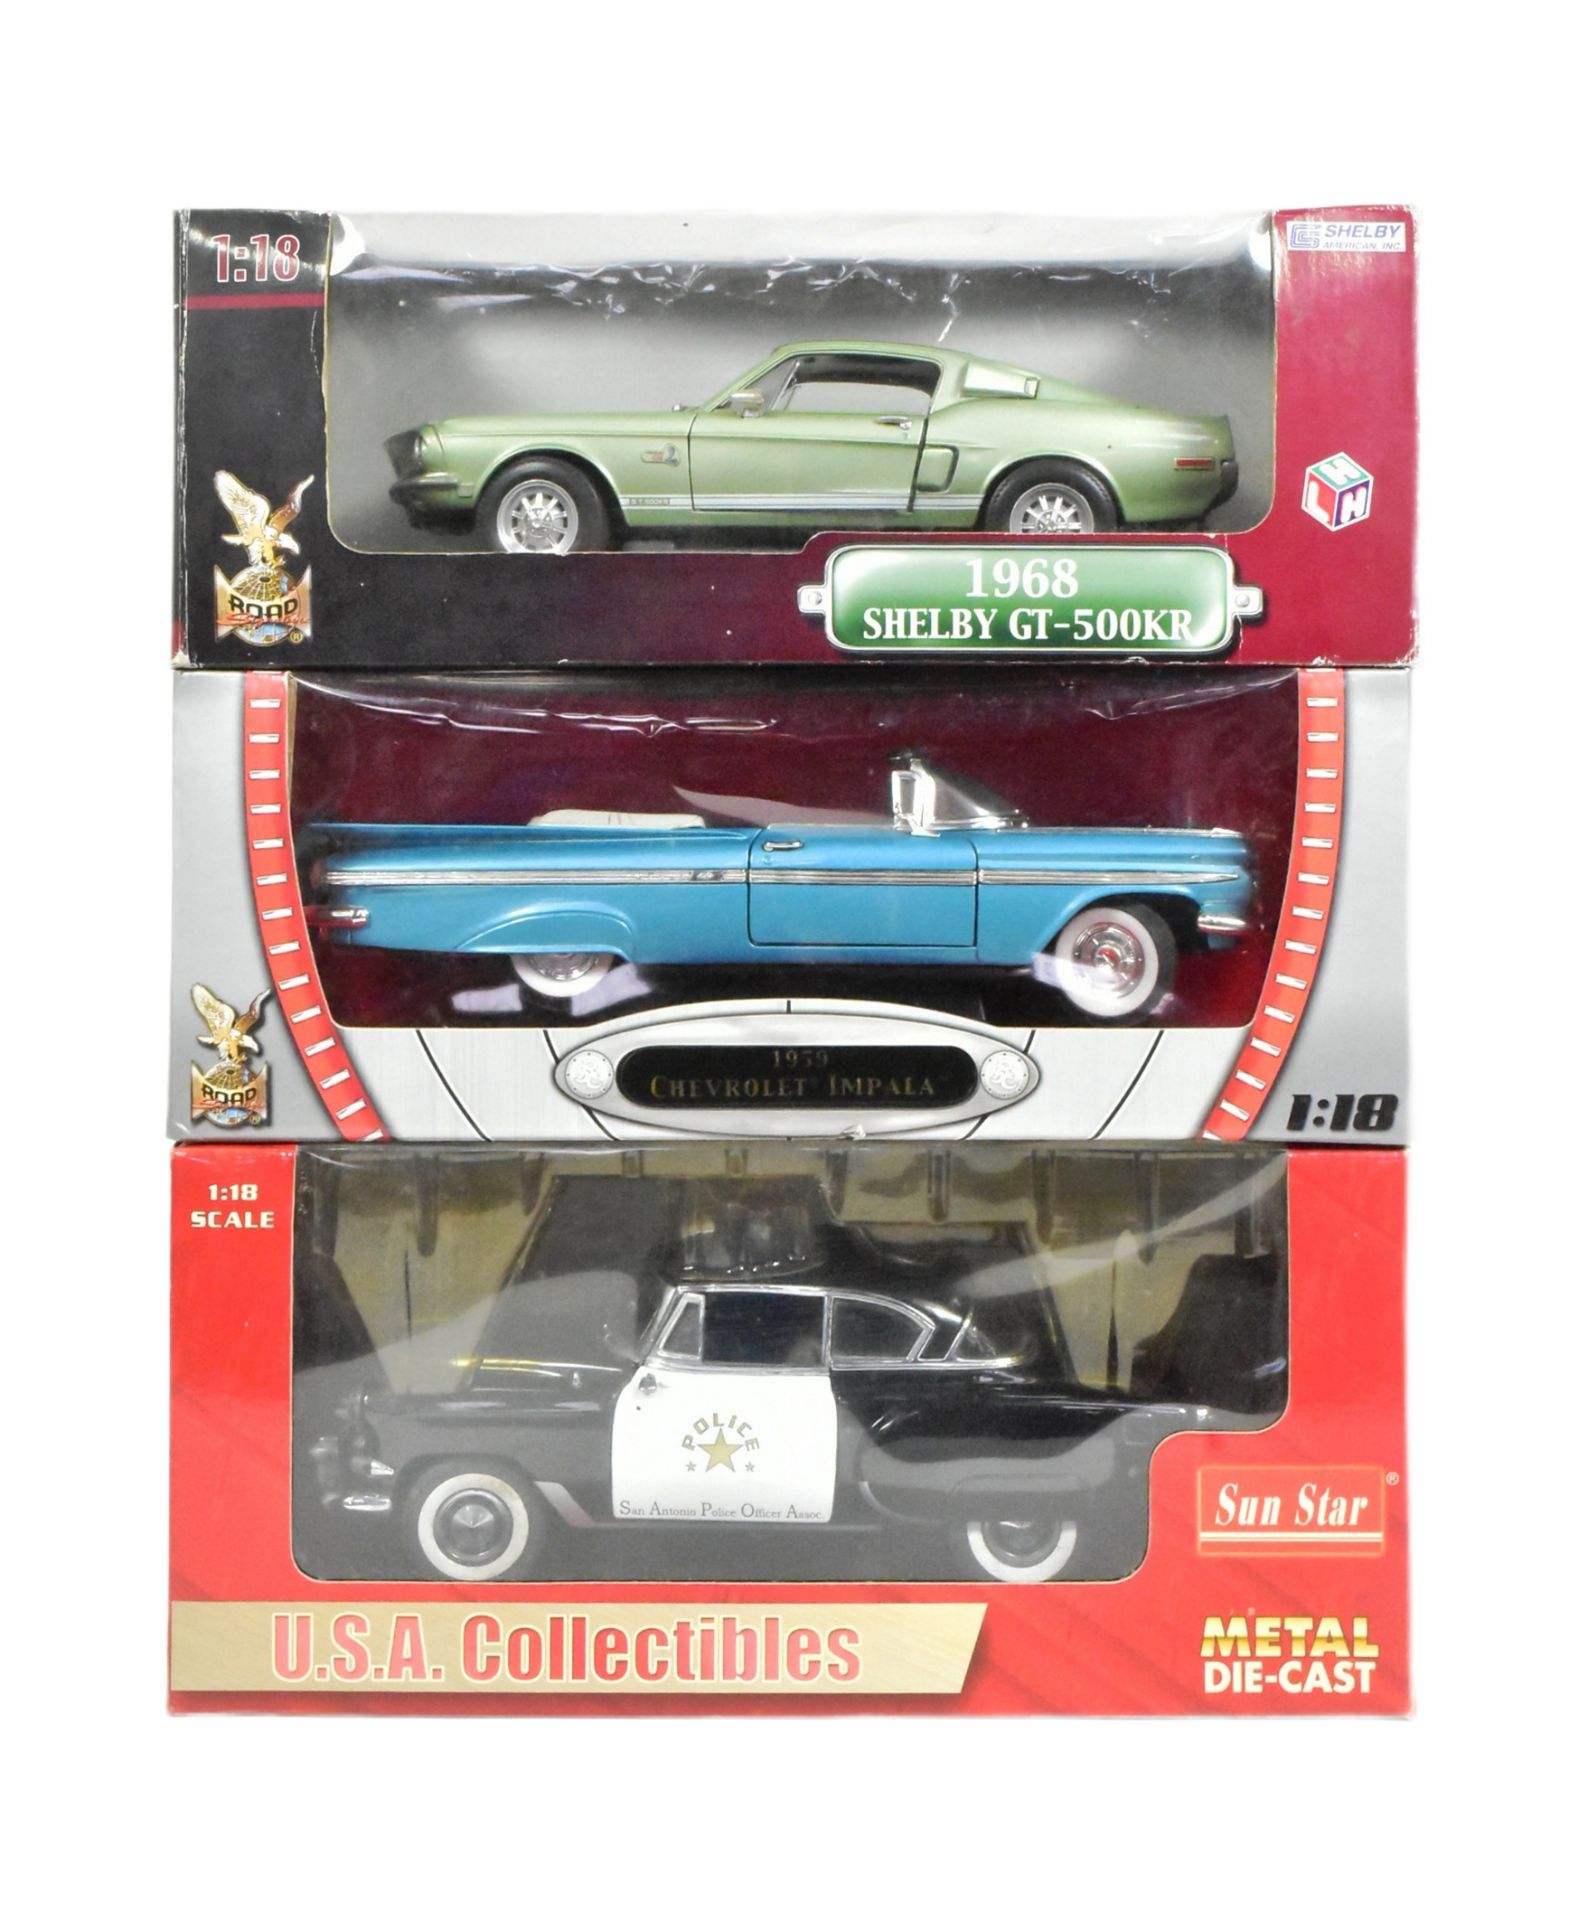 DIECAST - COLLECTION OF 1/18 SCALE DIECAST CARS